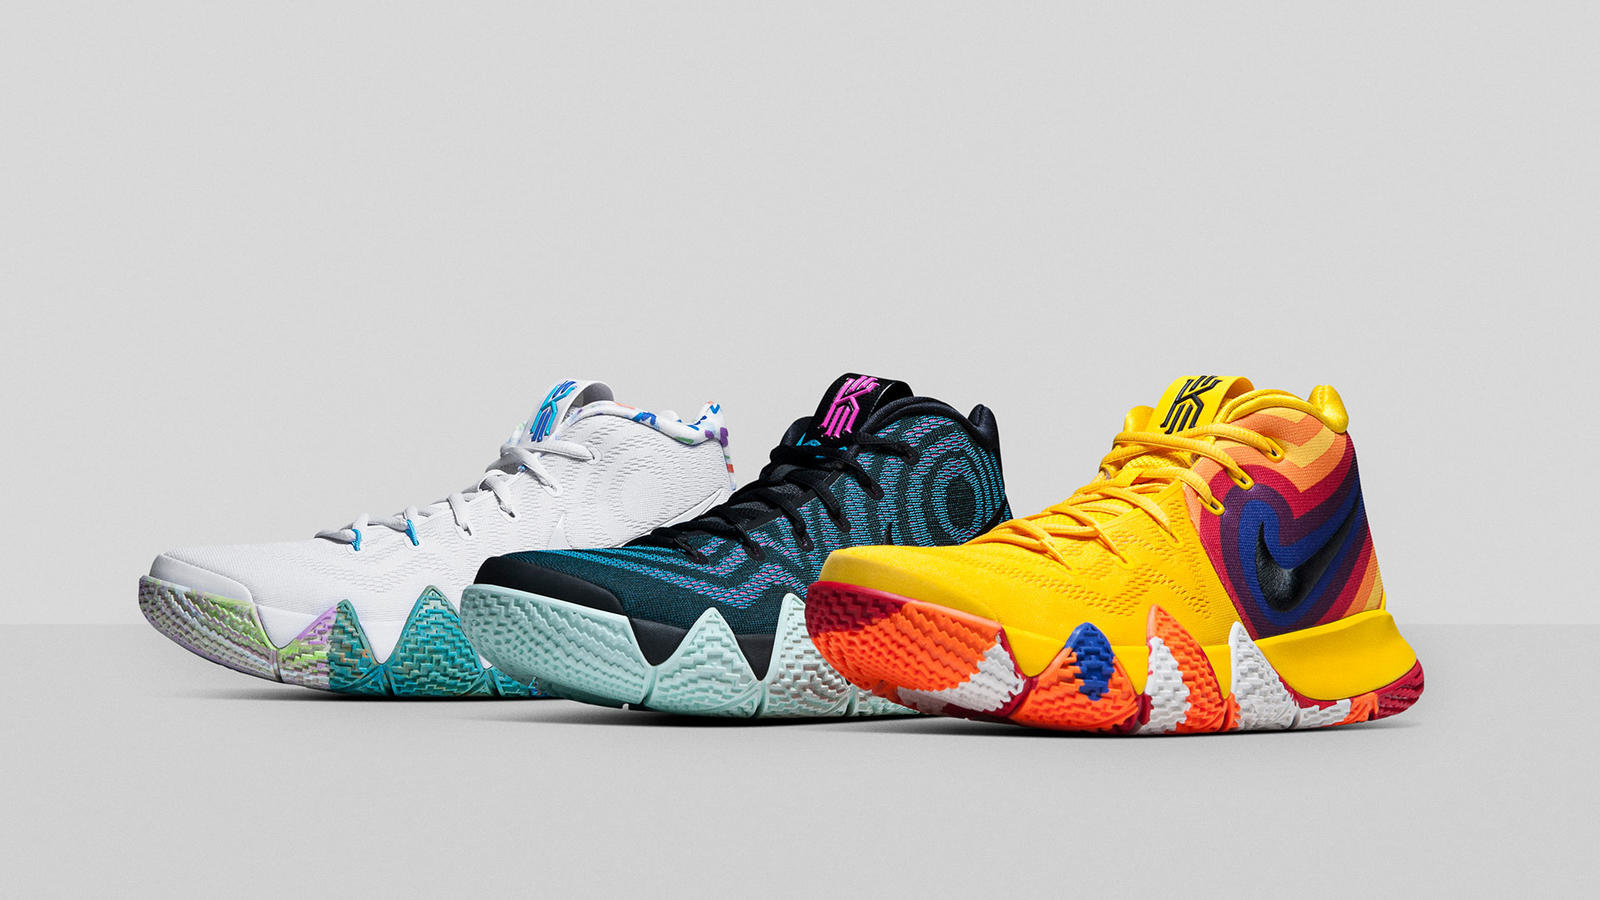 Nike Kyrie 4 decades pack